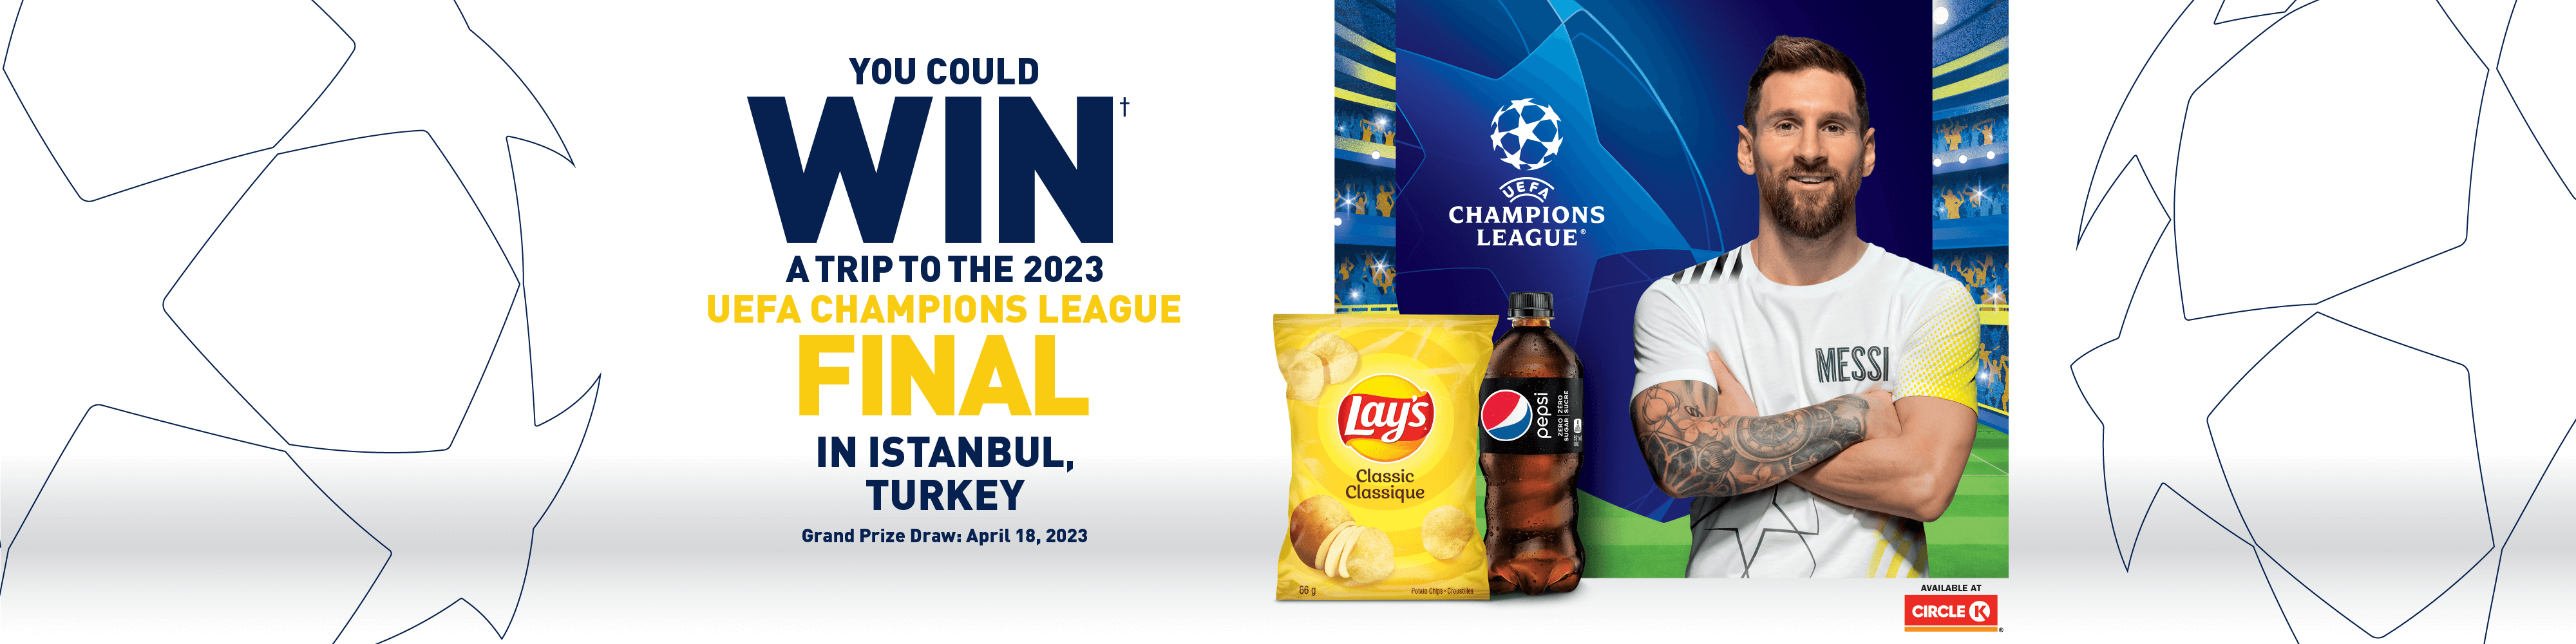 UEFA Champions League - 🏆 𝗪𝗔𝗟𝗟 𝗢𝗙 𝗖𝗛𝗔𝗠𝗣𝗜𝗢𝗡𝗦! 🏆 Who's  filling the 2021 slot? #UCL #UCLfinal